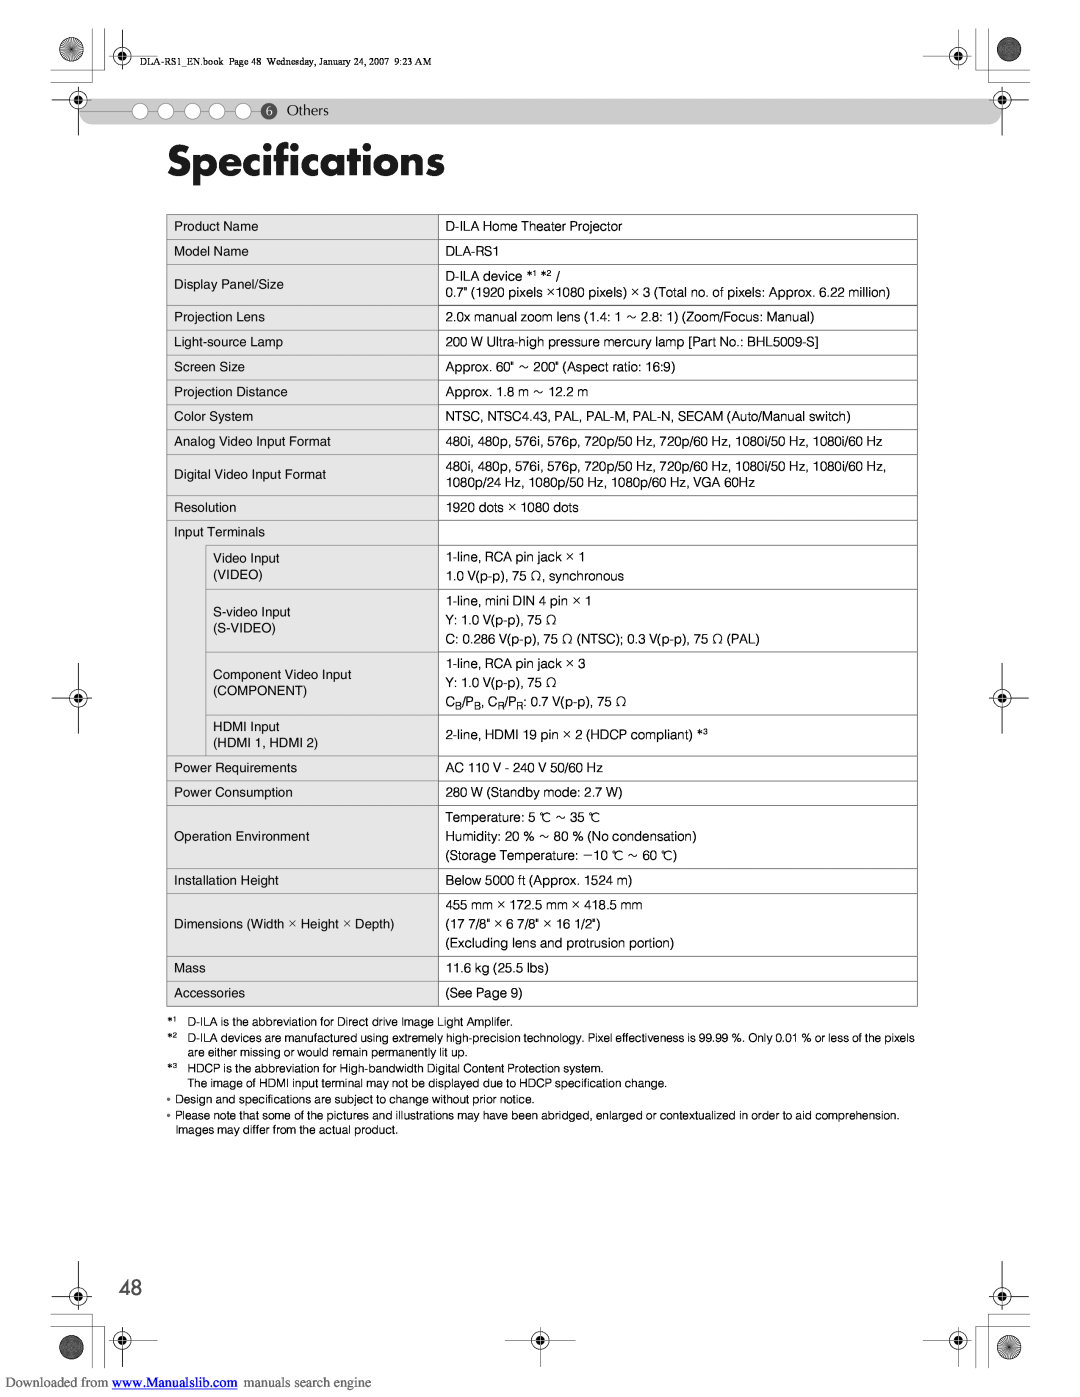 JVC DLA-RS1 manual Specifications, Others 